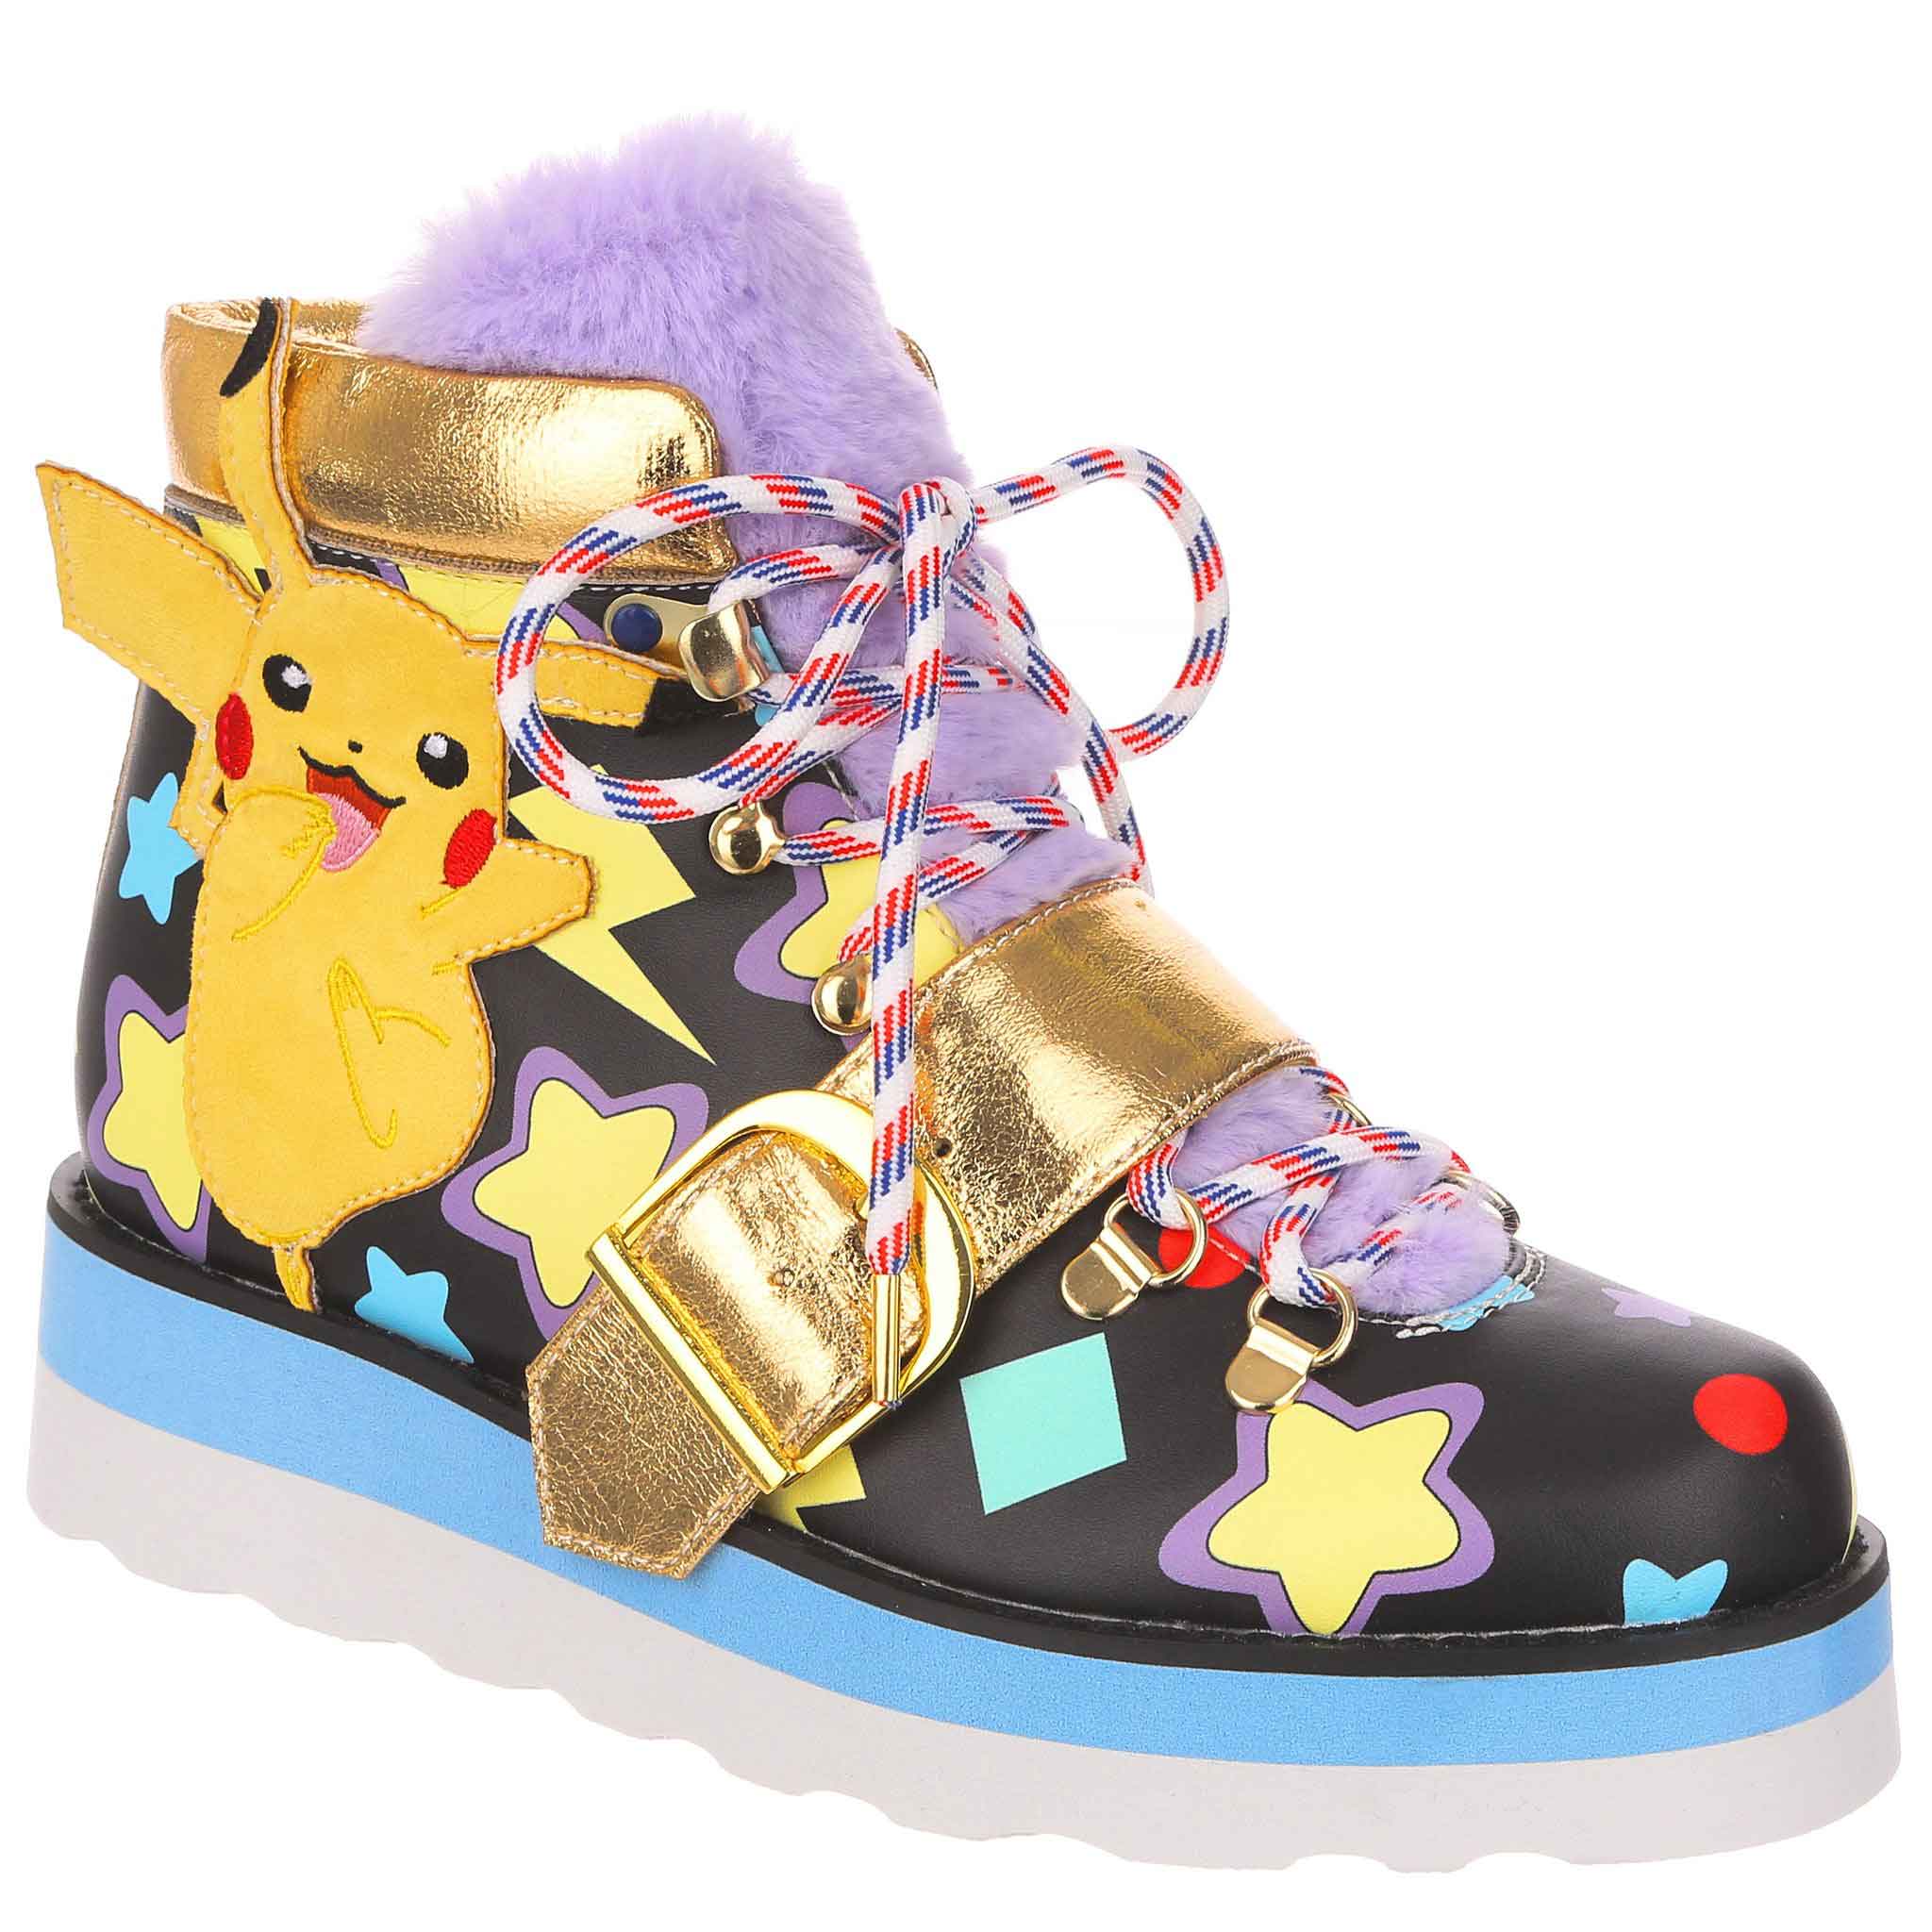 Black lace up ankle walking boot with blue and white platform, decorated with colourful stars and shapes and an applique of Pokemon character Pikachu. A gold strap crosses over the laces and the fluffy purple tongue.